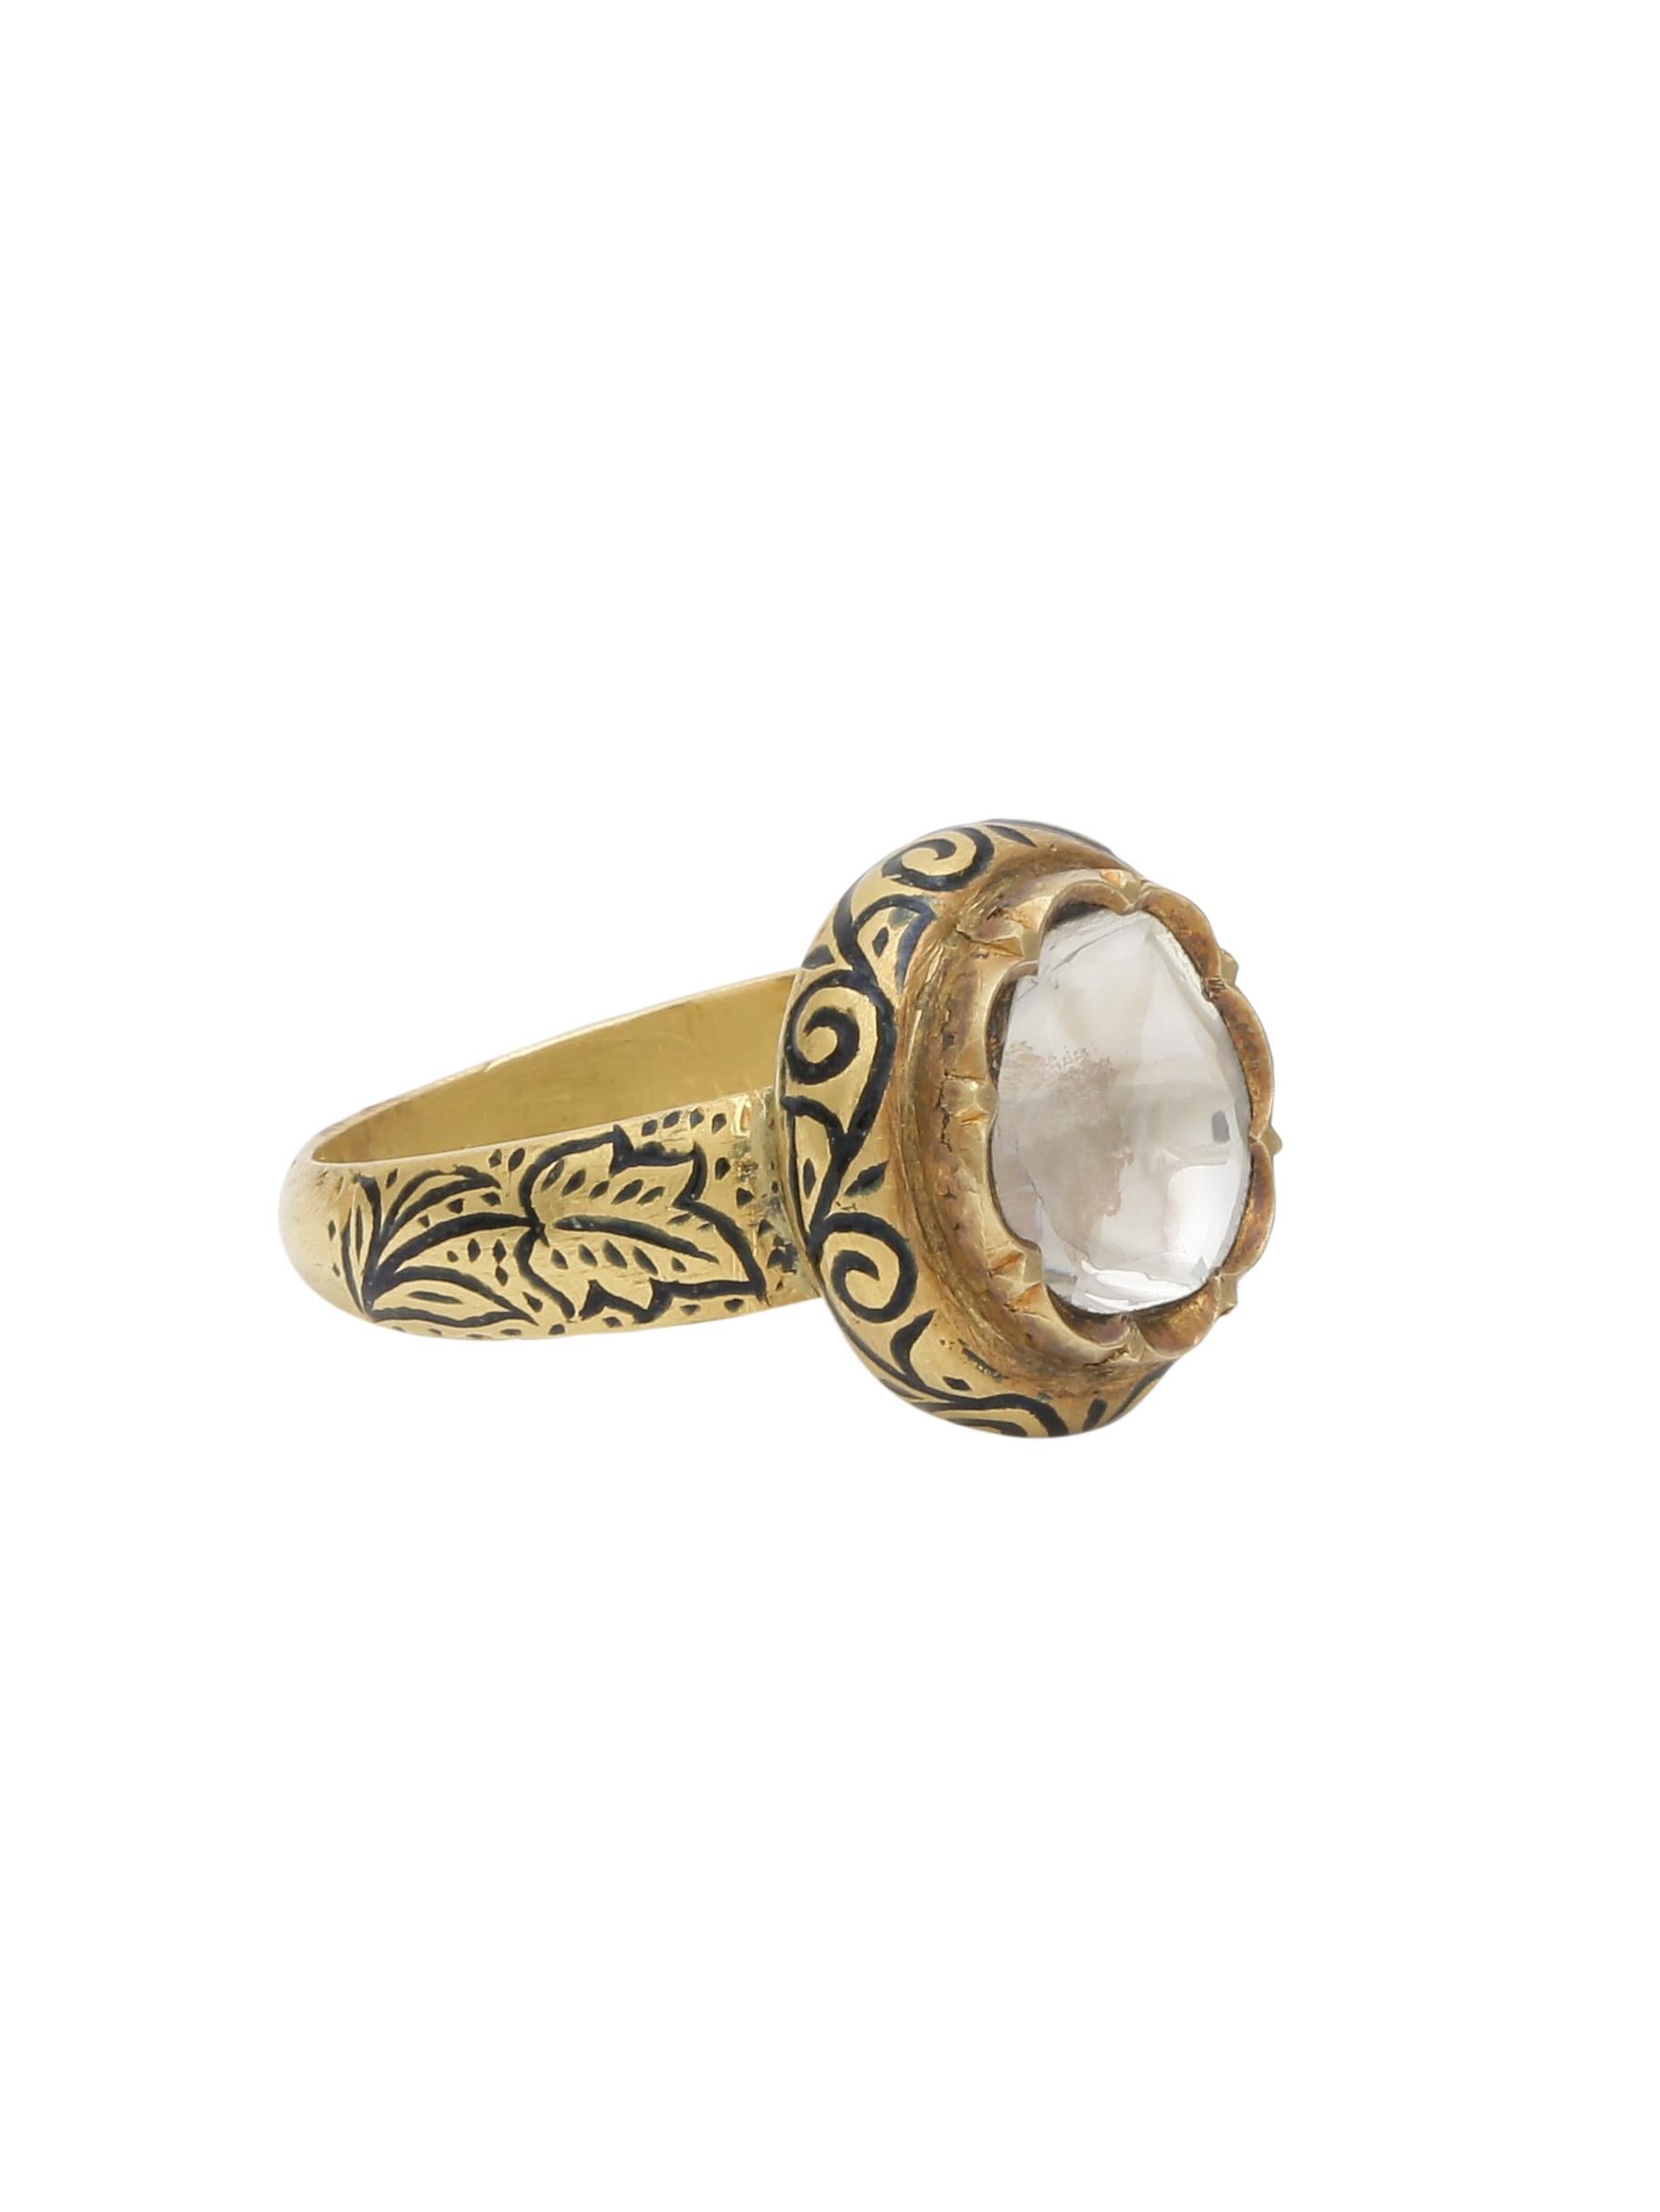 Uncut Diamond cocktail ring handcrafted in 18K Gold with enamel For Sale